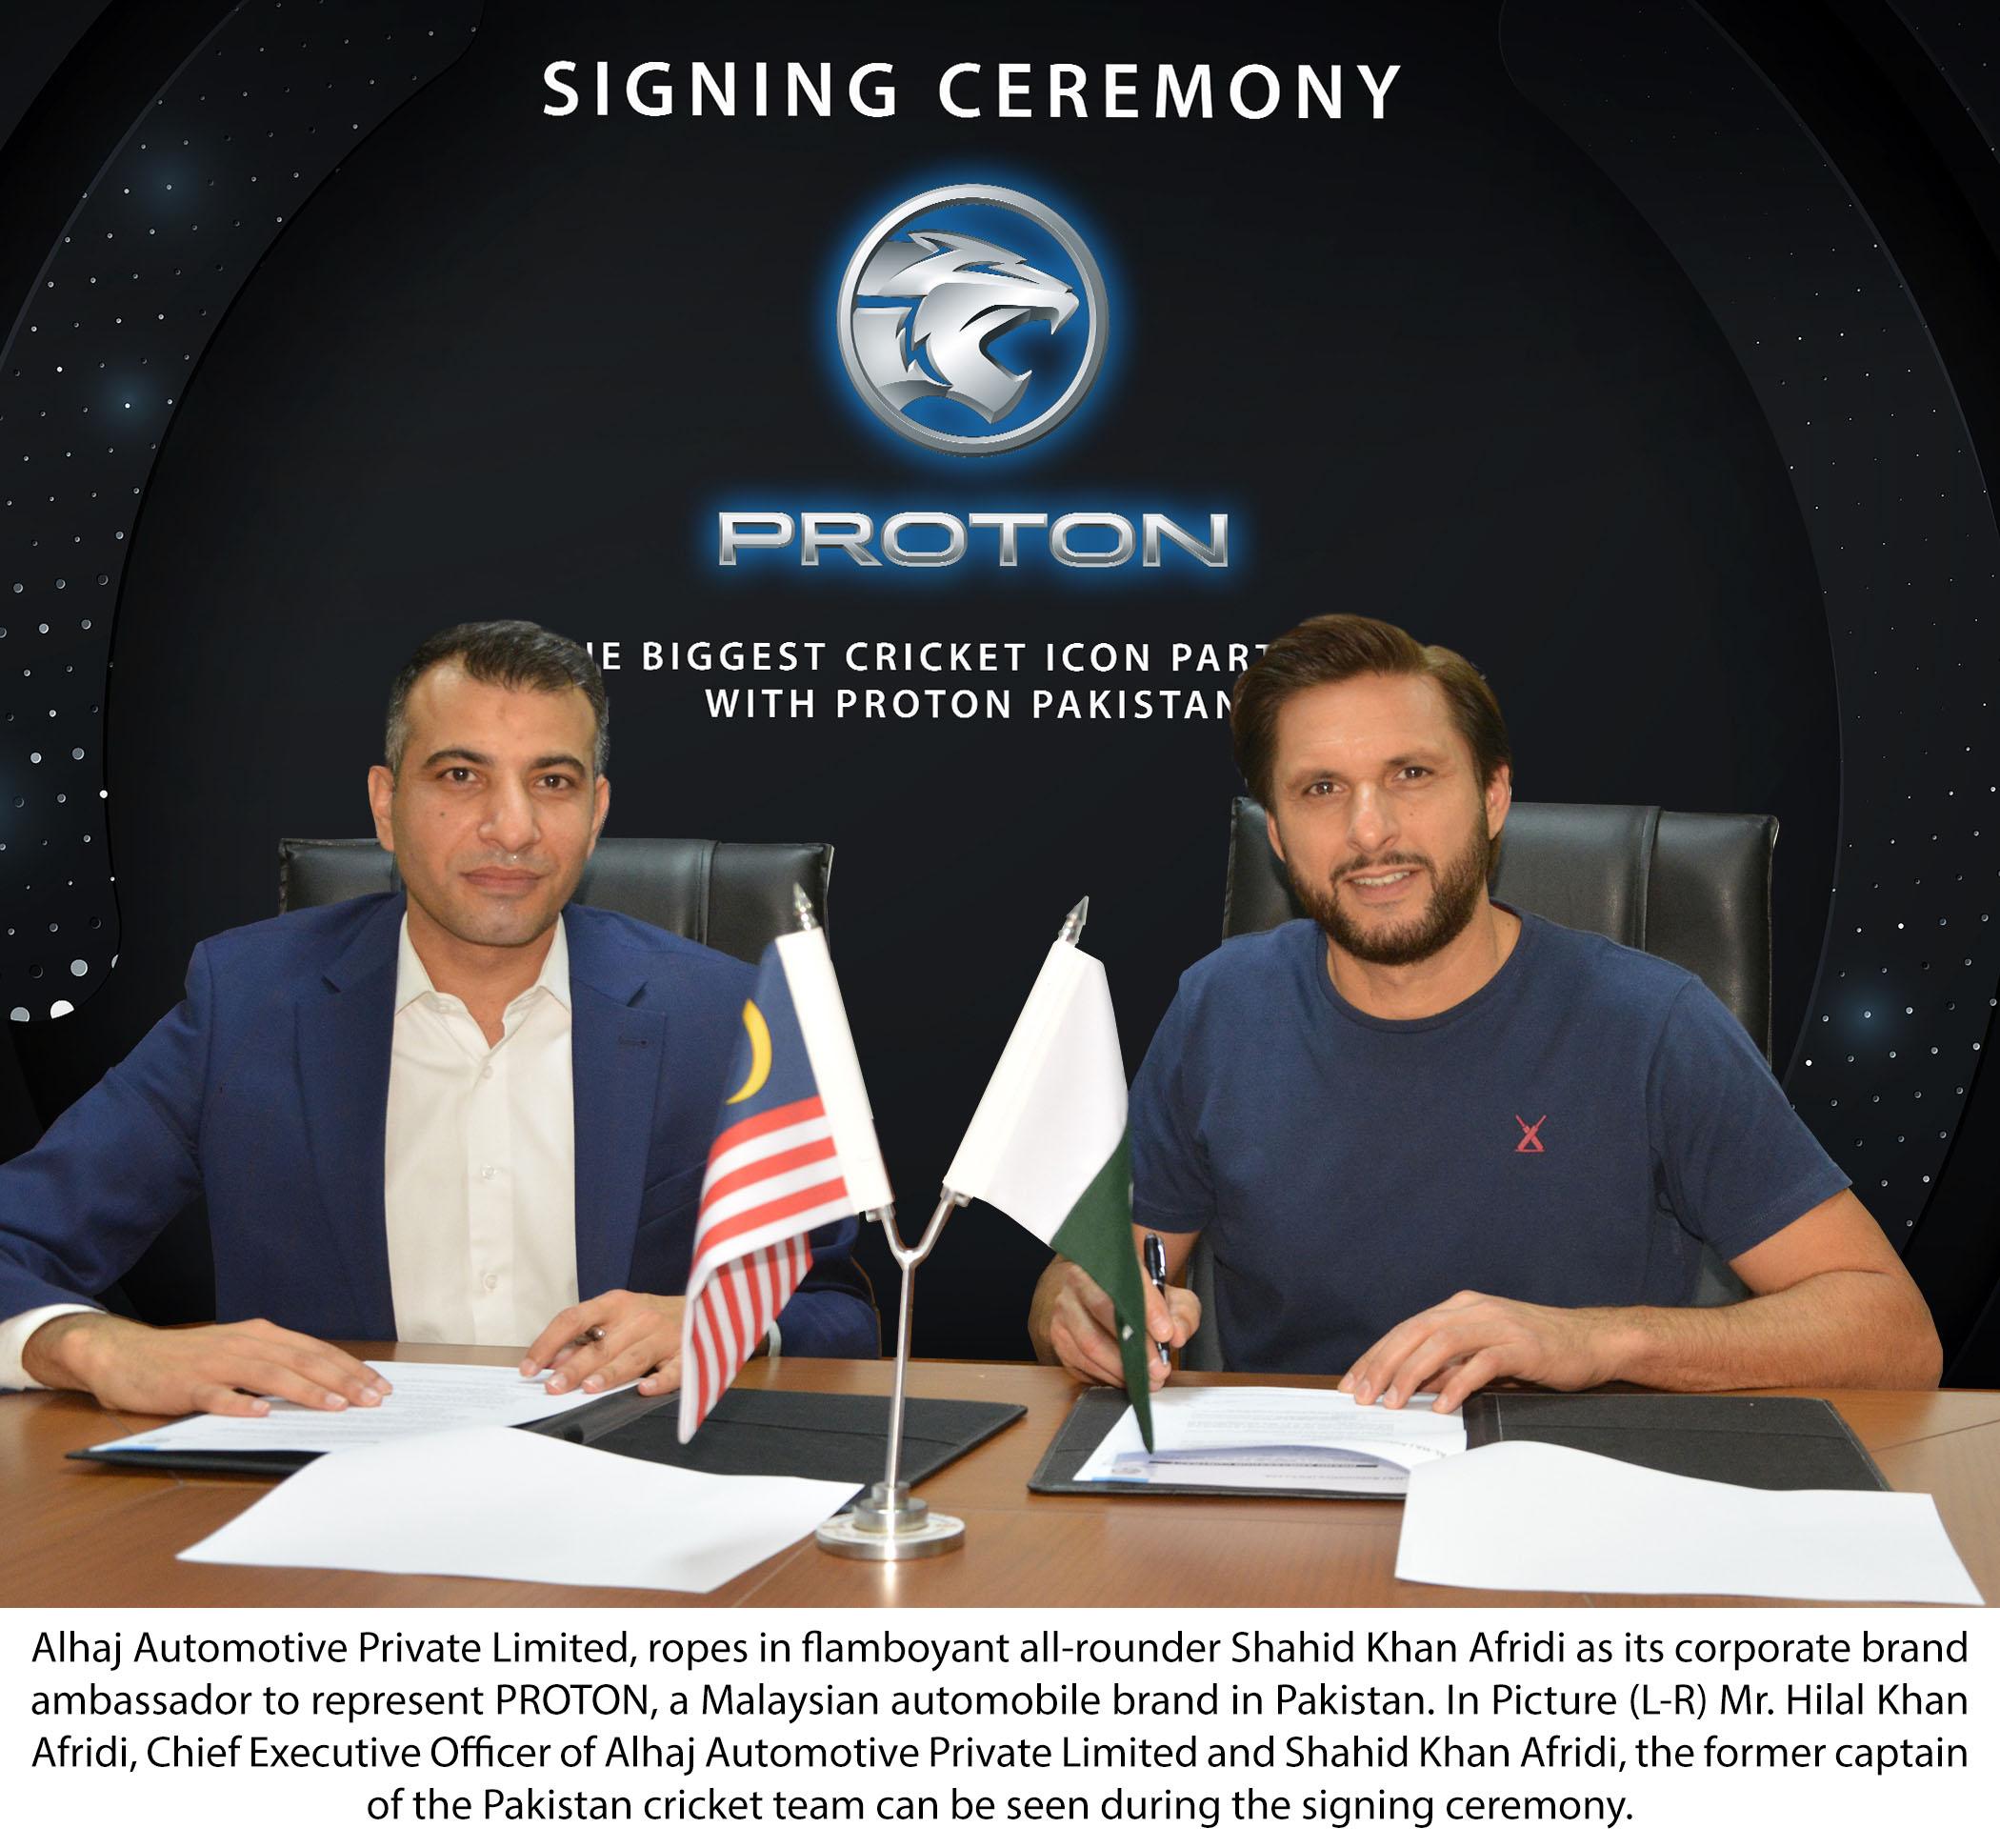 Alhaj Automotive Private Limited ropes in flamboyant all-rounder Shahid Afridi as brand ambassador for PROTON